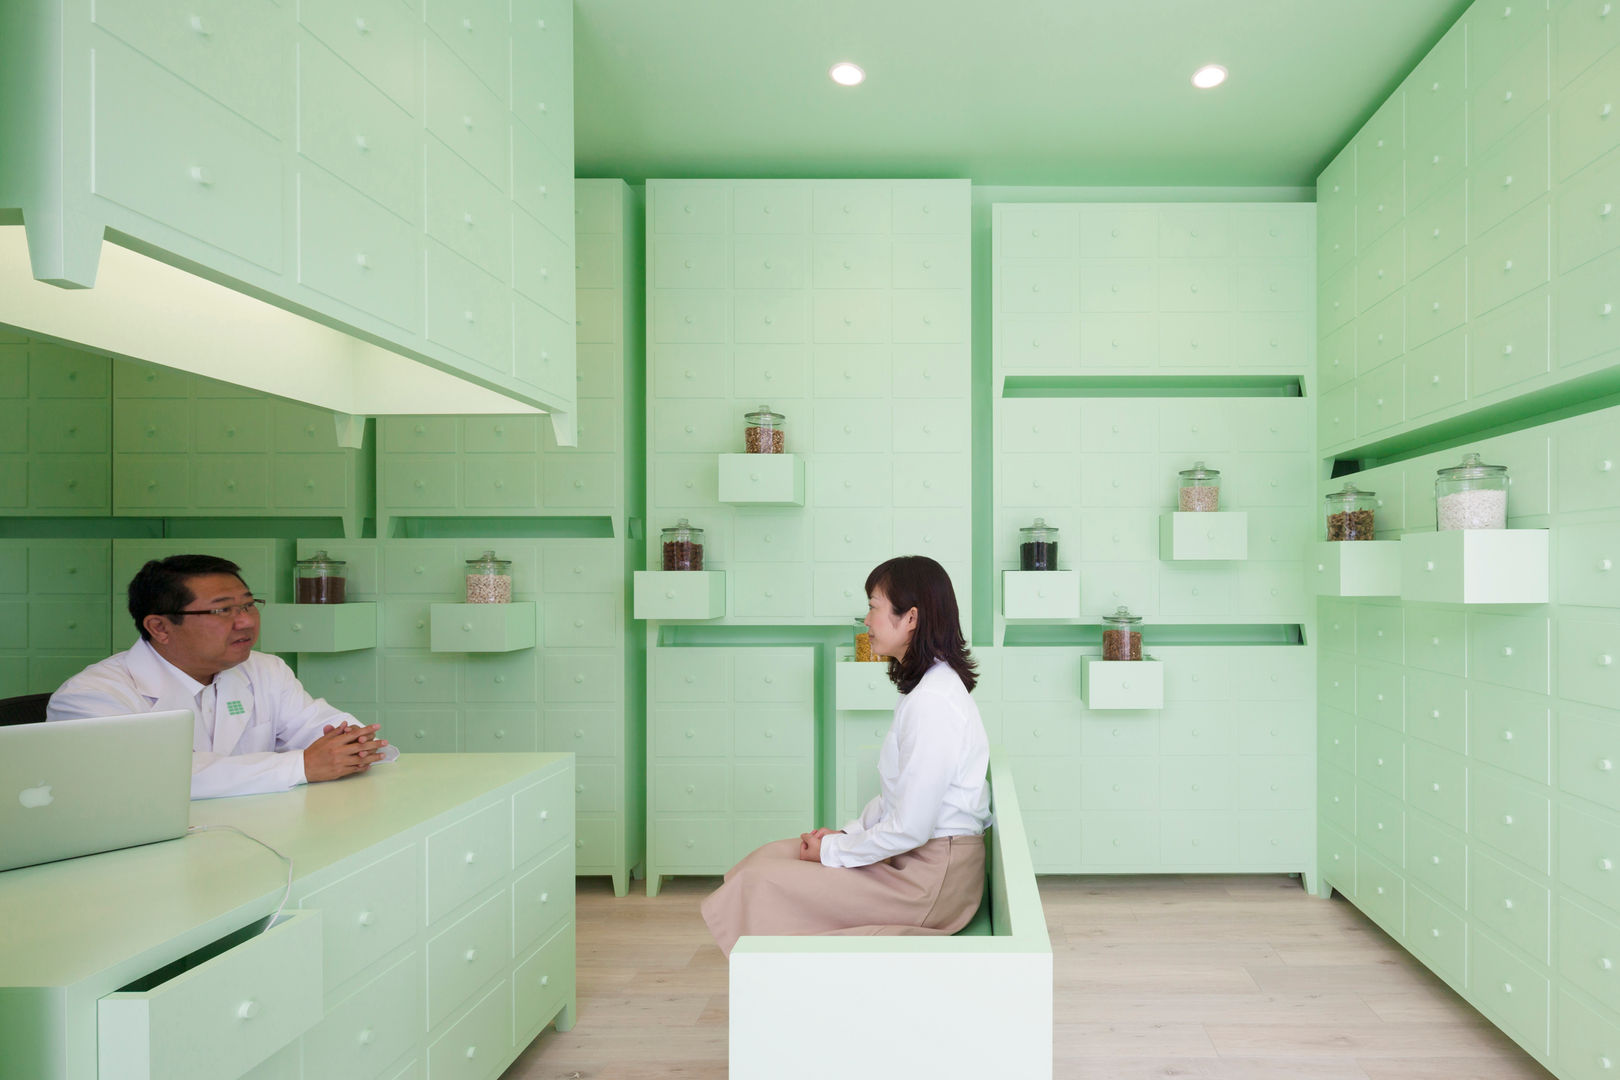 SUMIYOSHIDO Kampo Lounge / 住吉堂鍼灸院, id inc.. id inc.. Commercial spaces Offices & stores